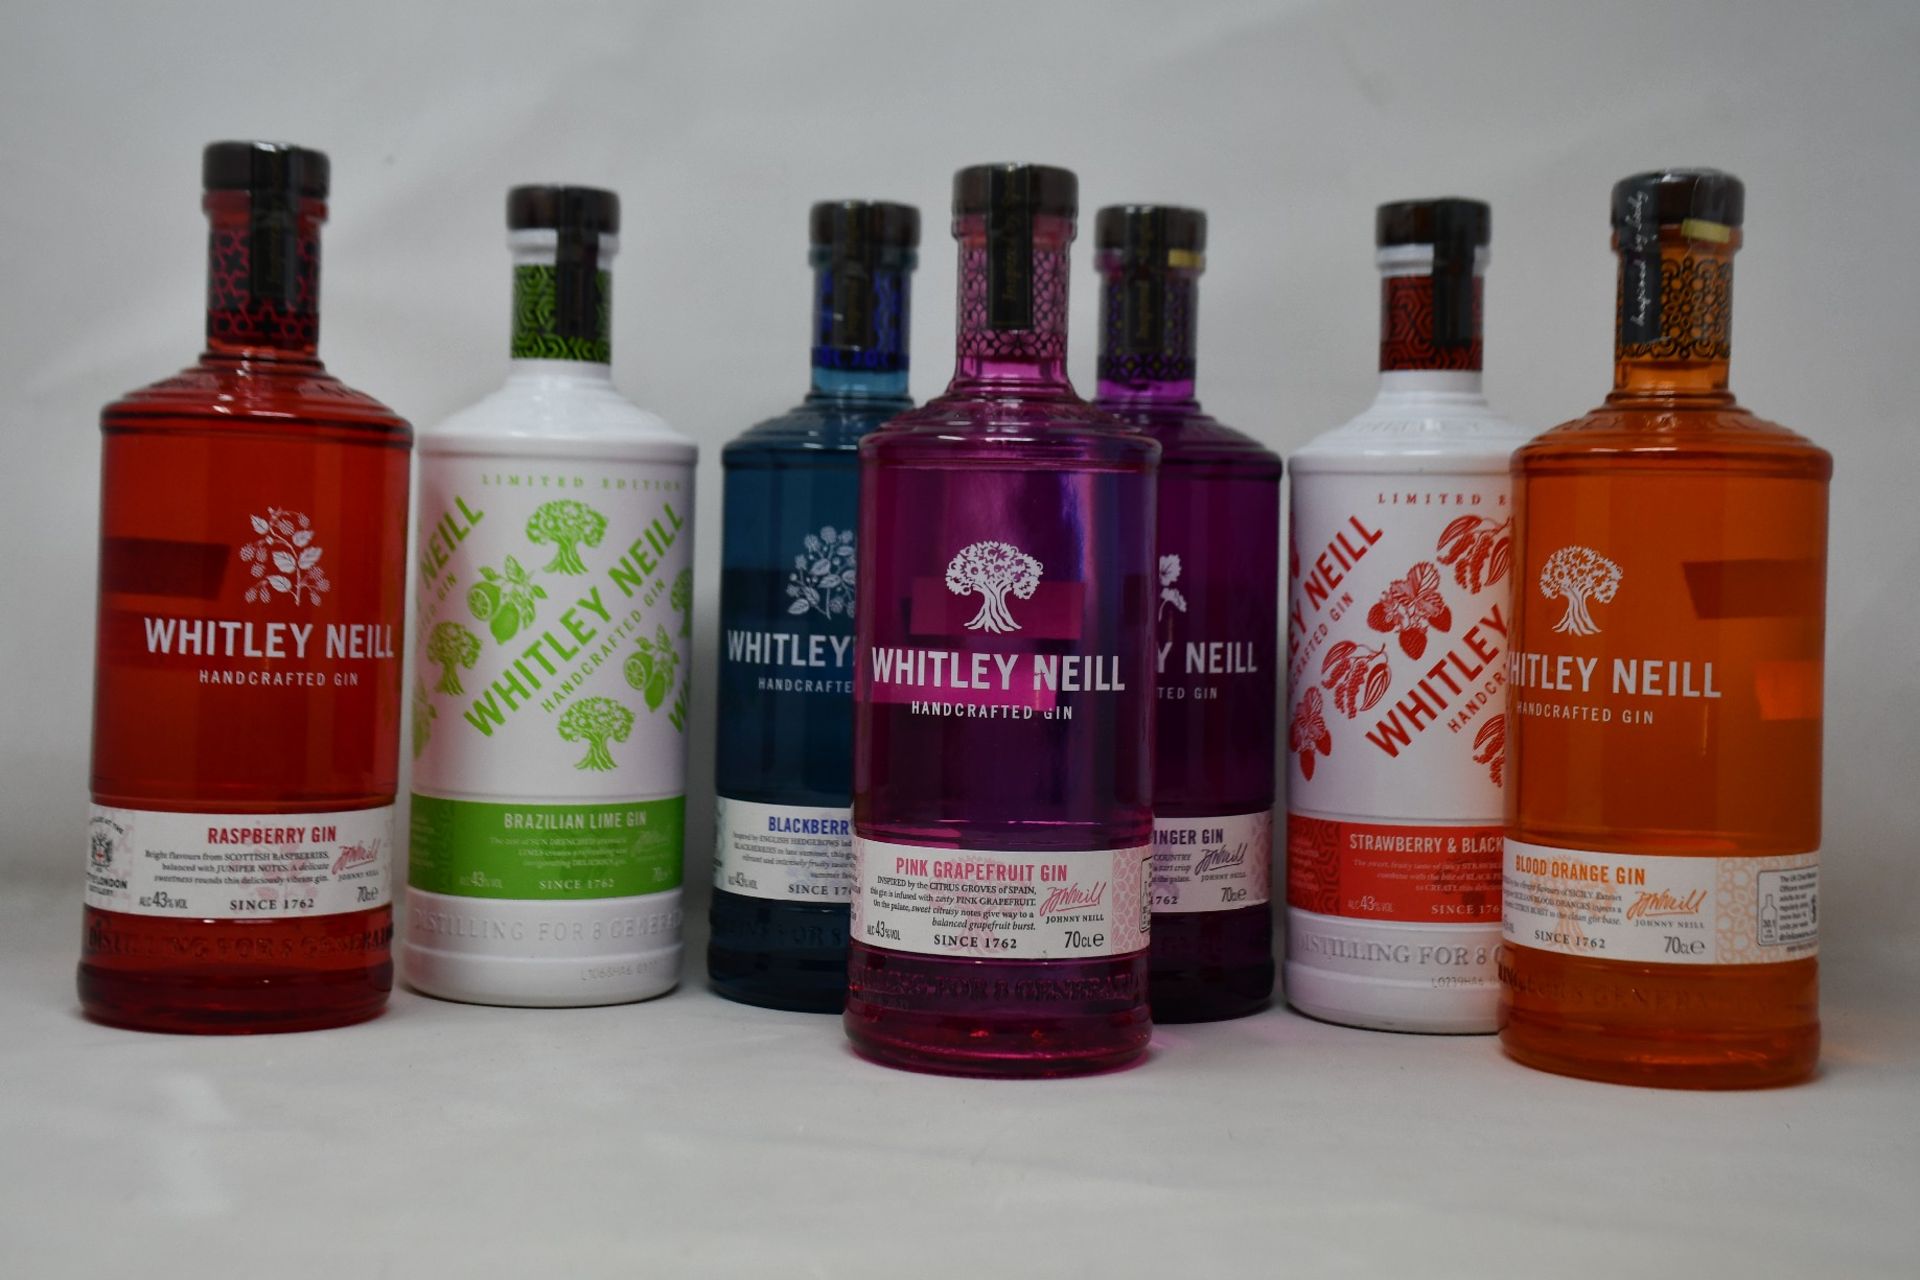 Seven bottles of Whitley Neill handcrafted gin (Assorted flavours) (700ml) (Over 18s only).